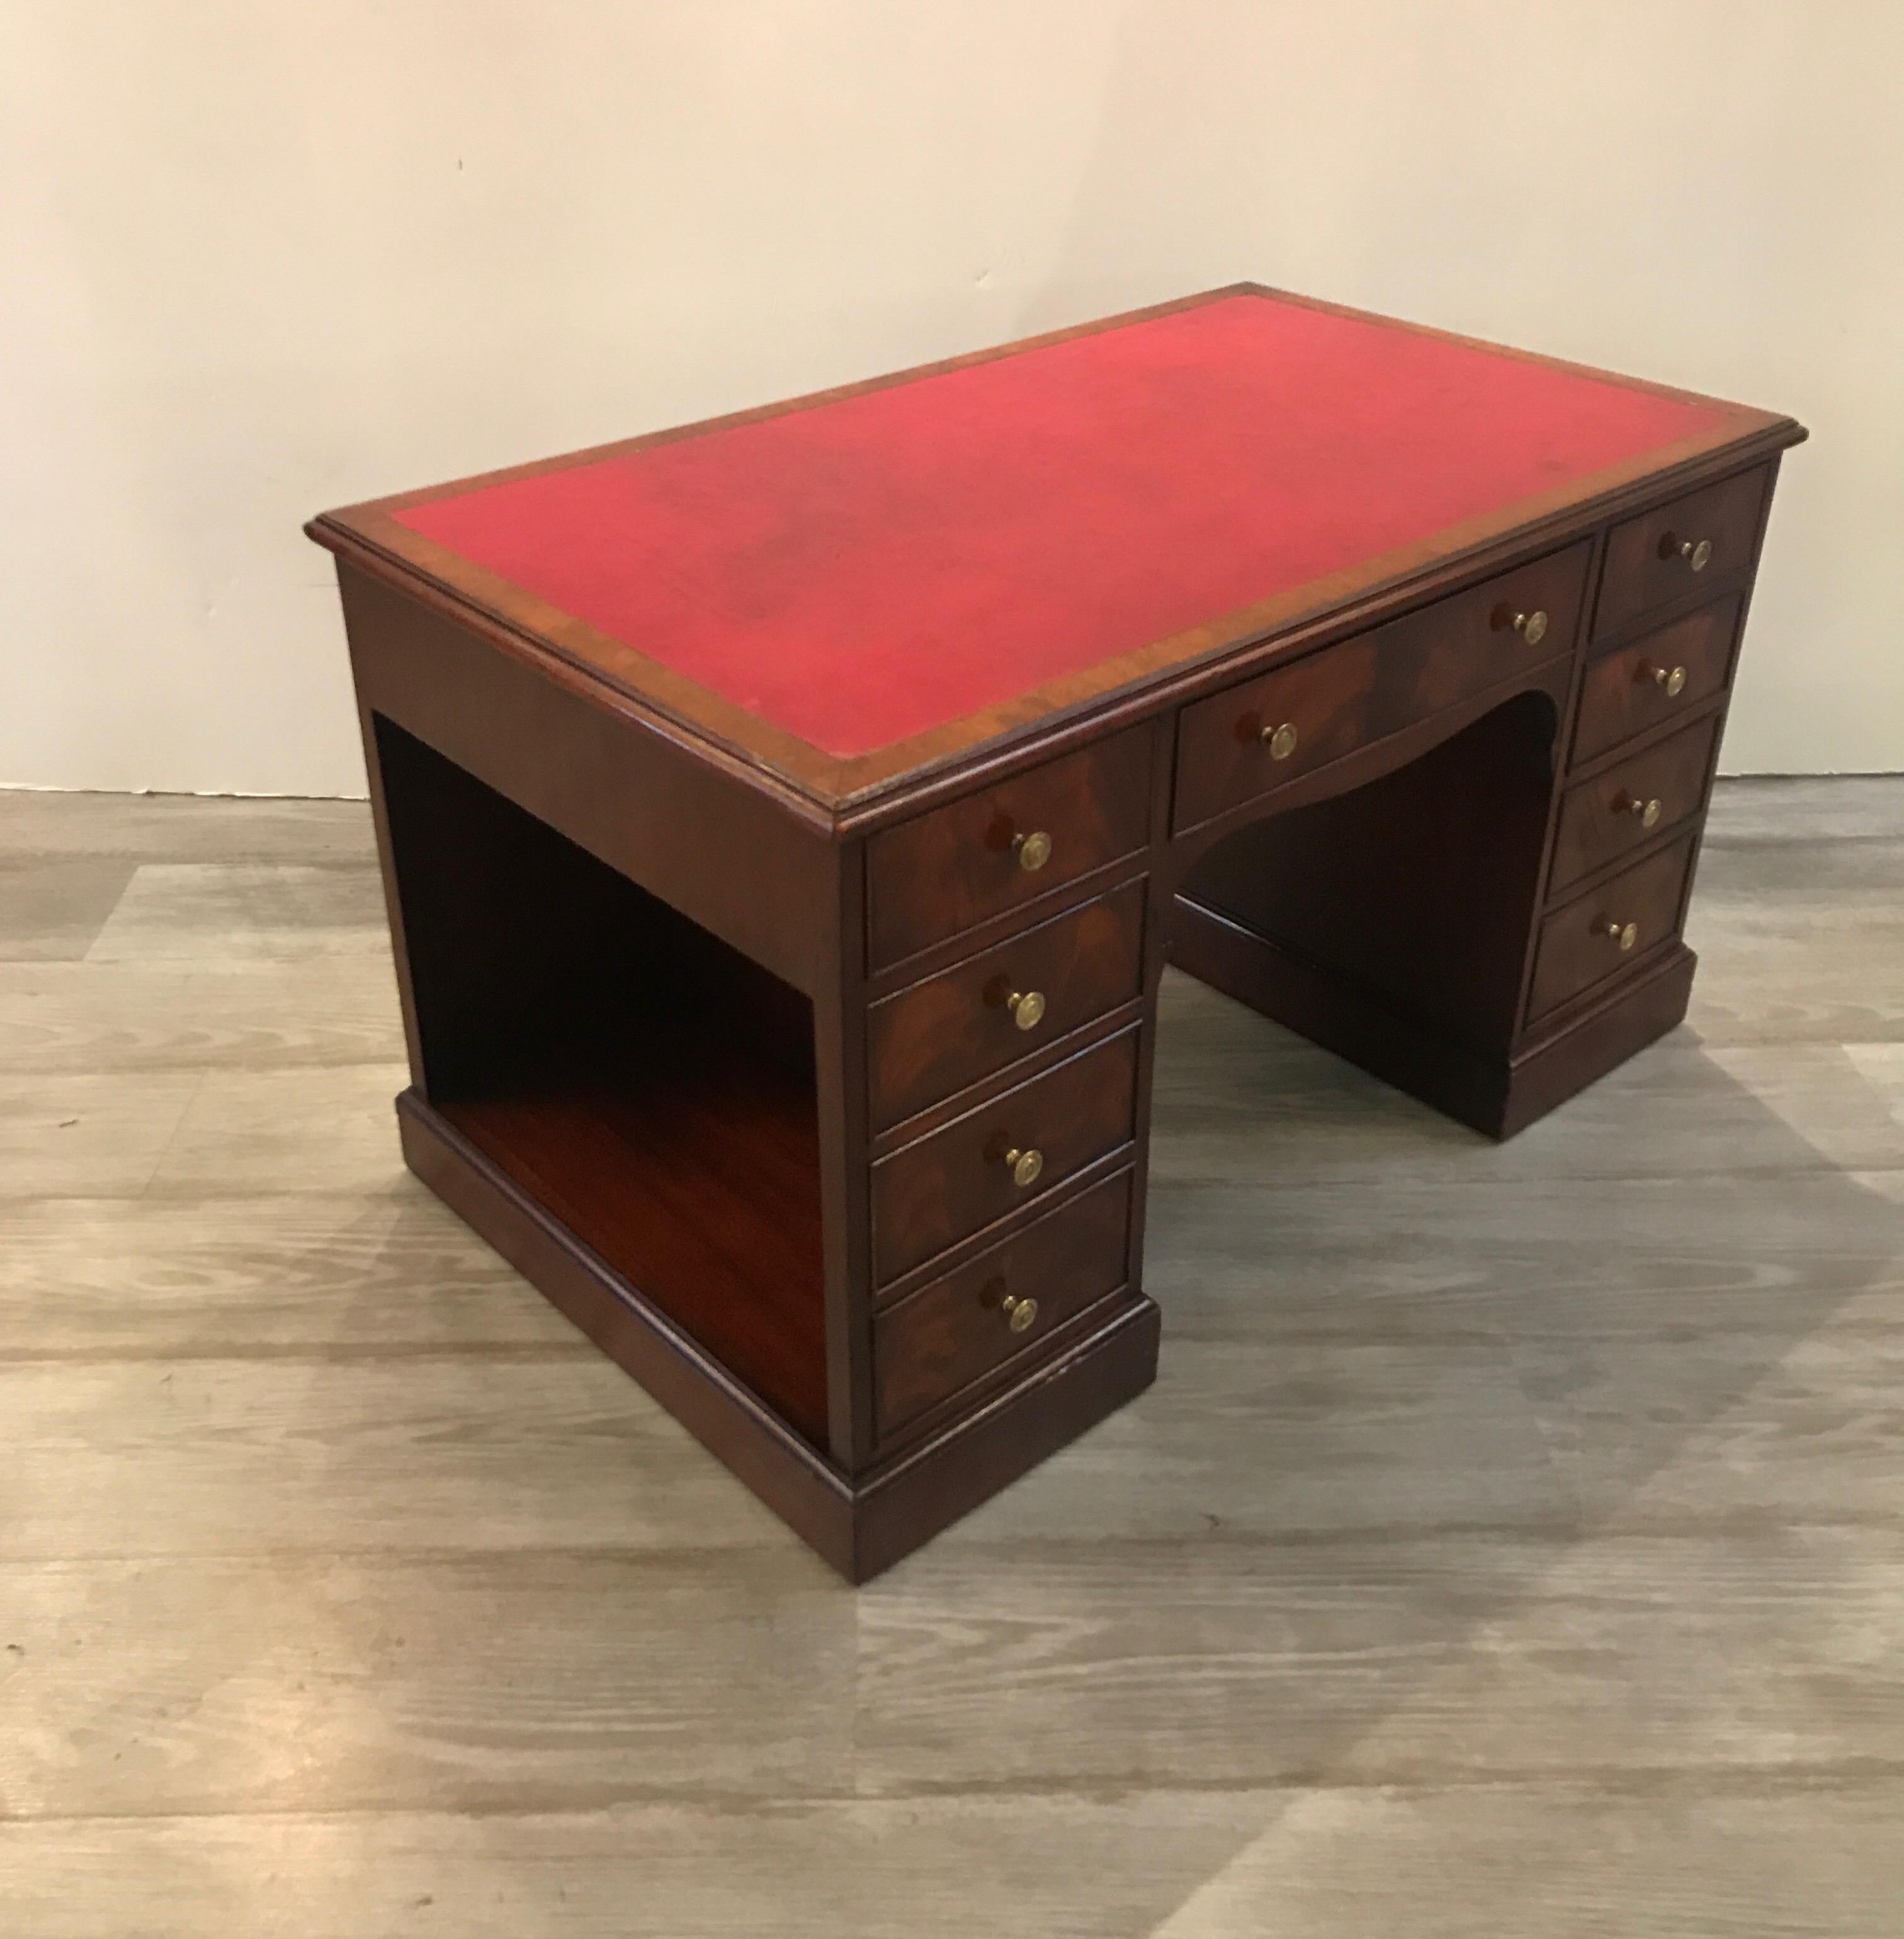 20th Century Cocktail Table in the Form of a Small Executive Desk